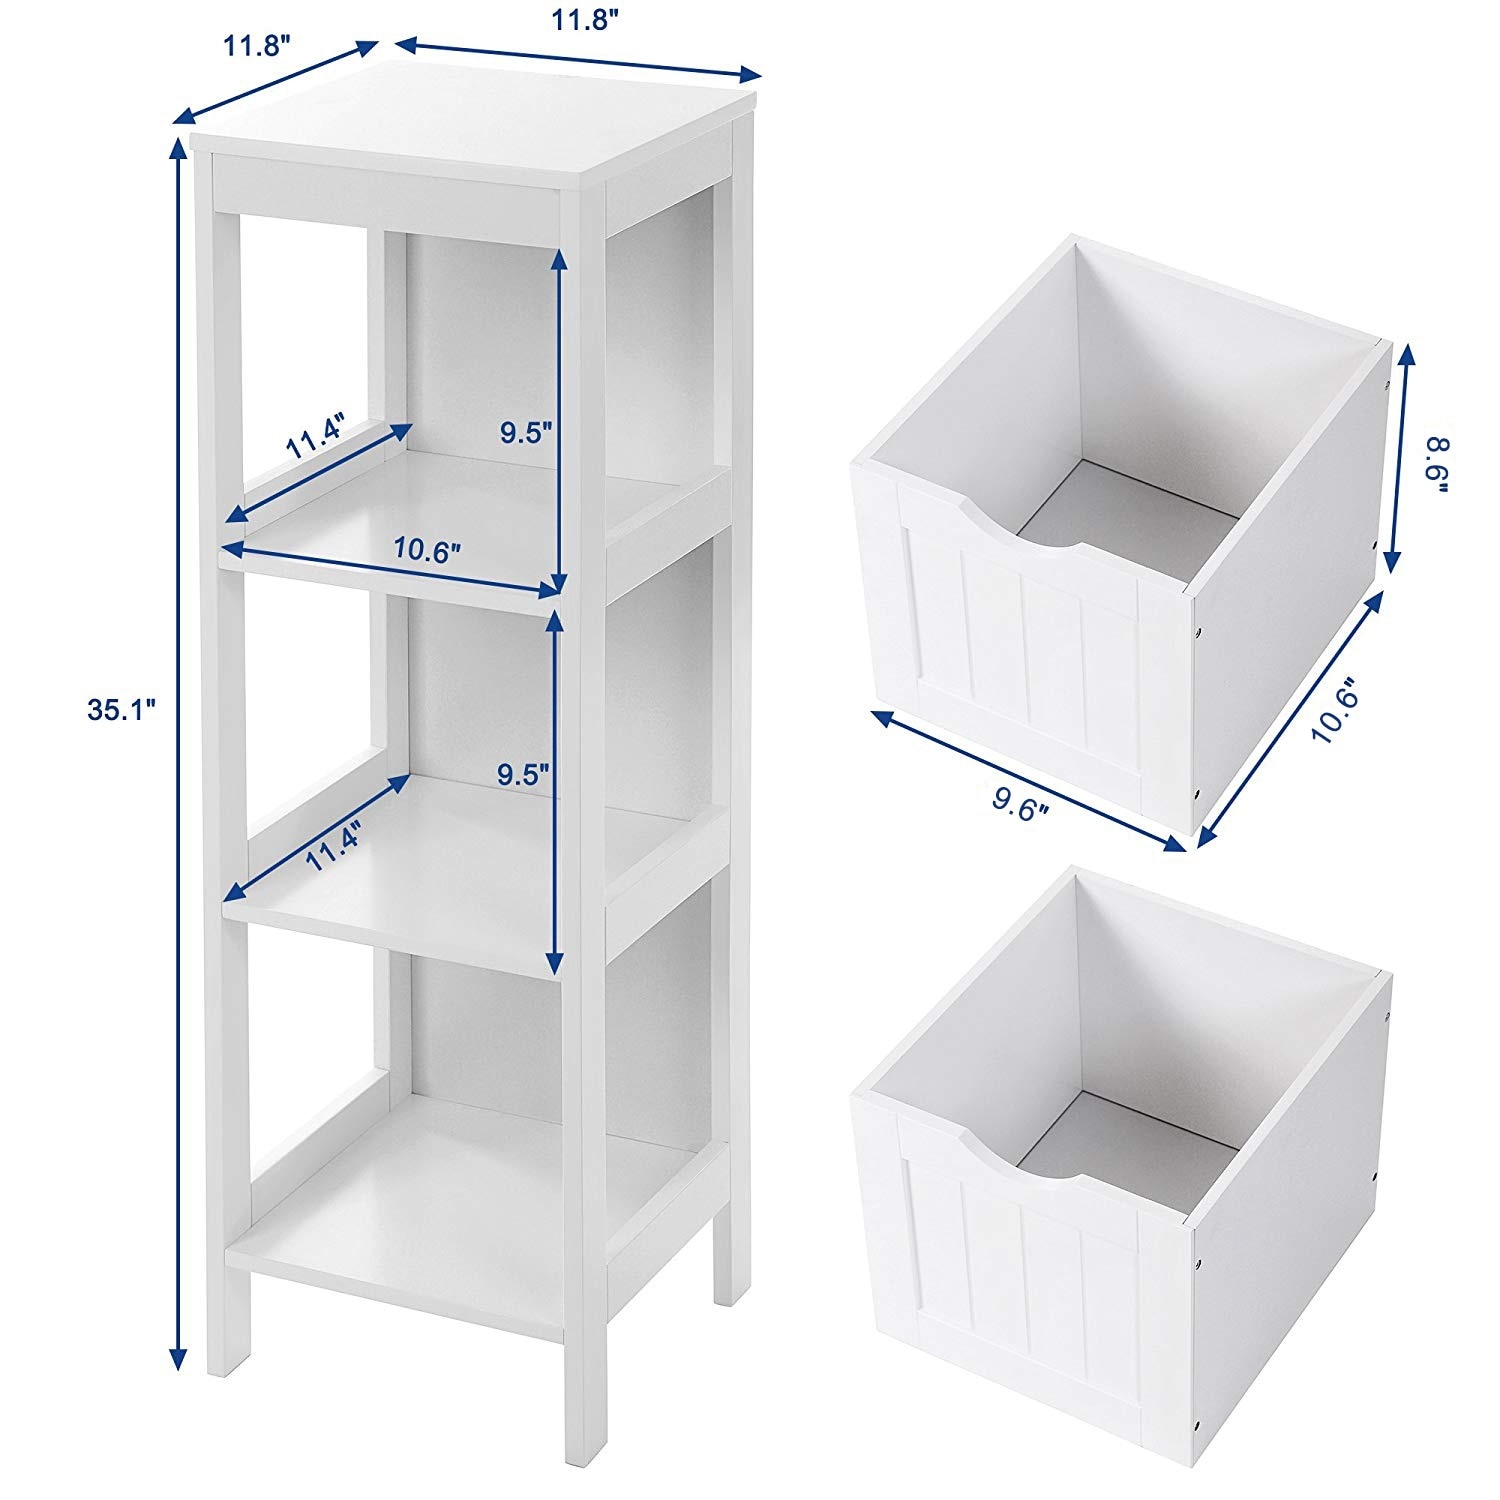 https://ak1.ostkcdn.com/images/products/is/images/direct/5c398e99b35ed8c73ff581bfd23045ae844725df/White-Multifunctional-Bathroom-Storage-Cabinet-with-2-Drawers.jpg